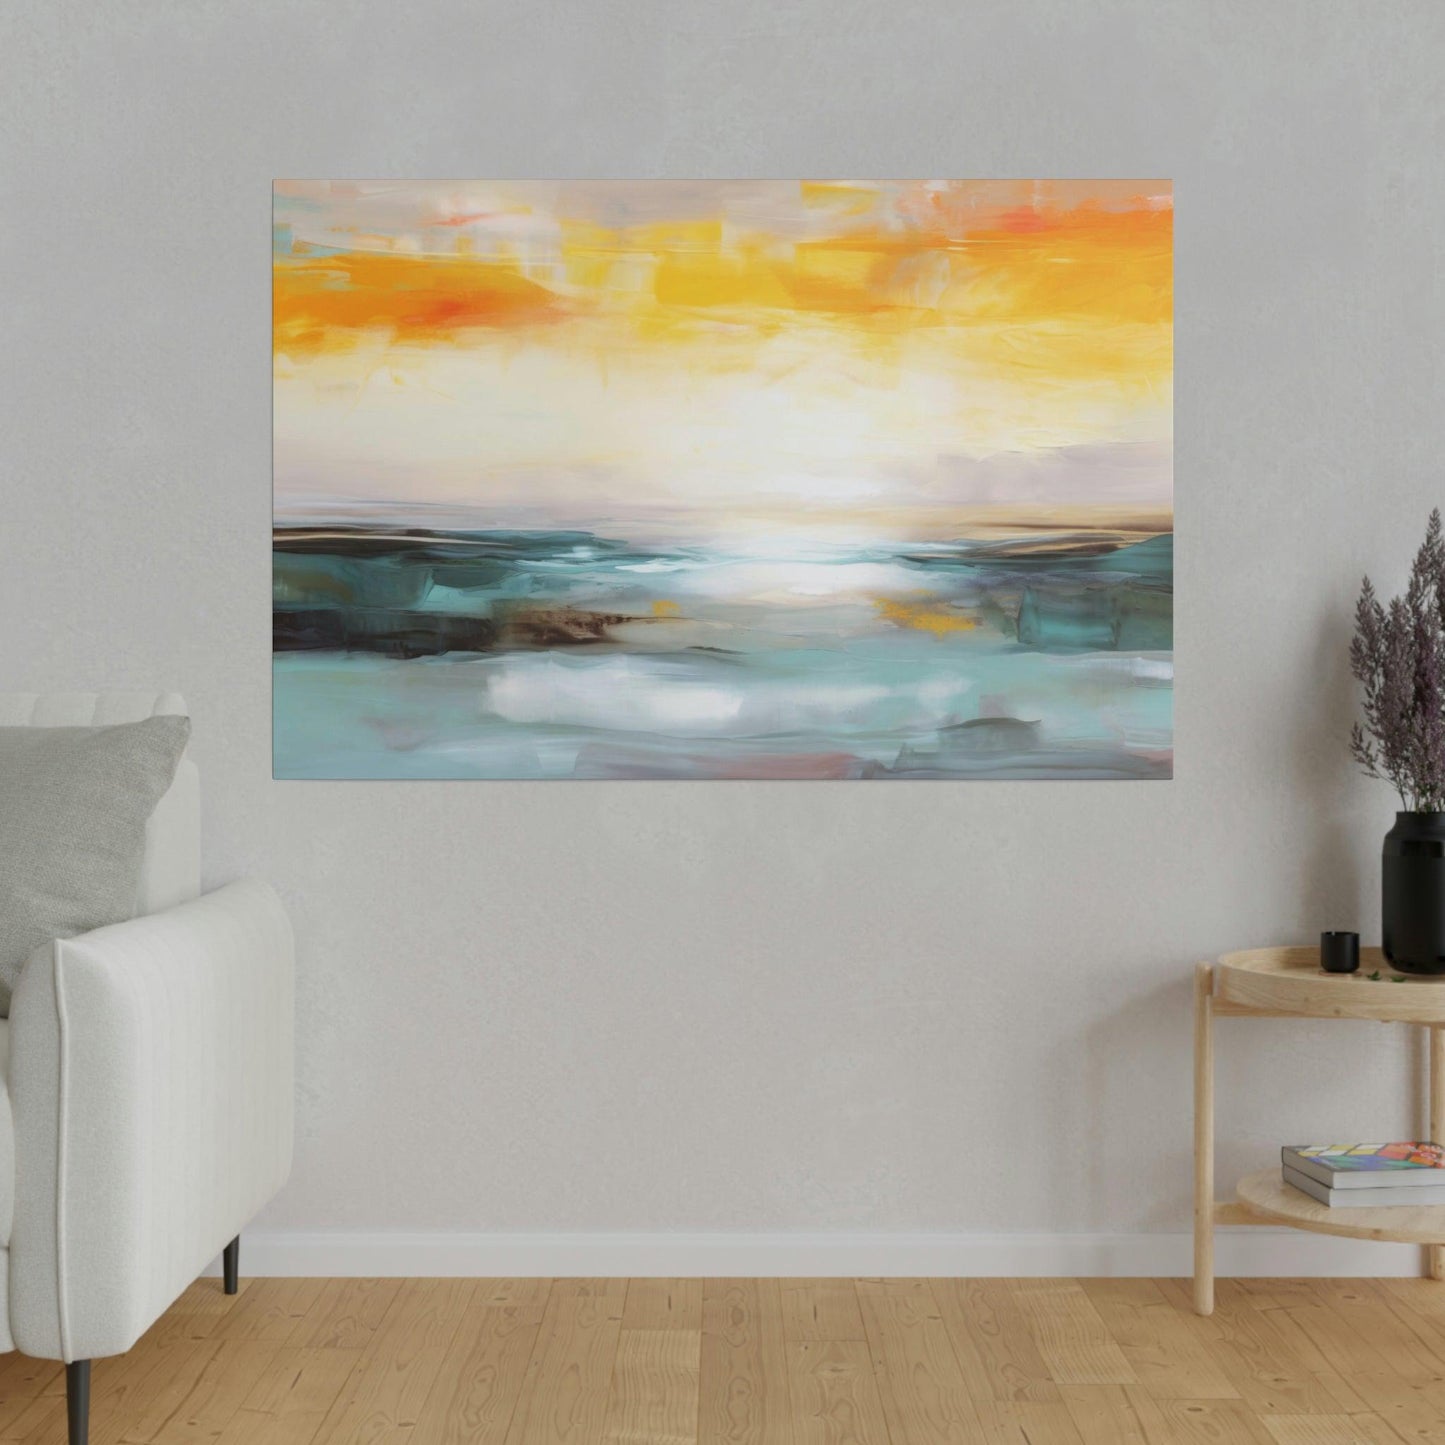 Ocean Sunset 4 Wall Art - Abstract Picture Canvas Print Wall Painting Modern Artwork Wall Art for Living Room Home Office Décor